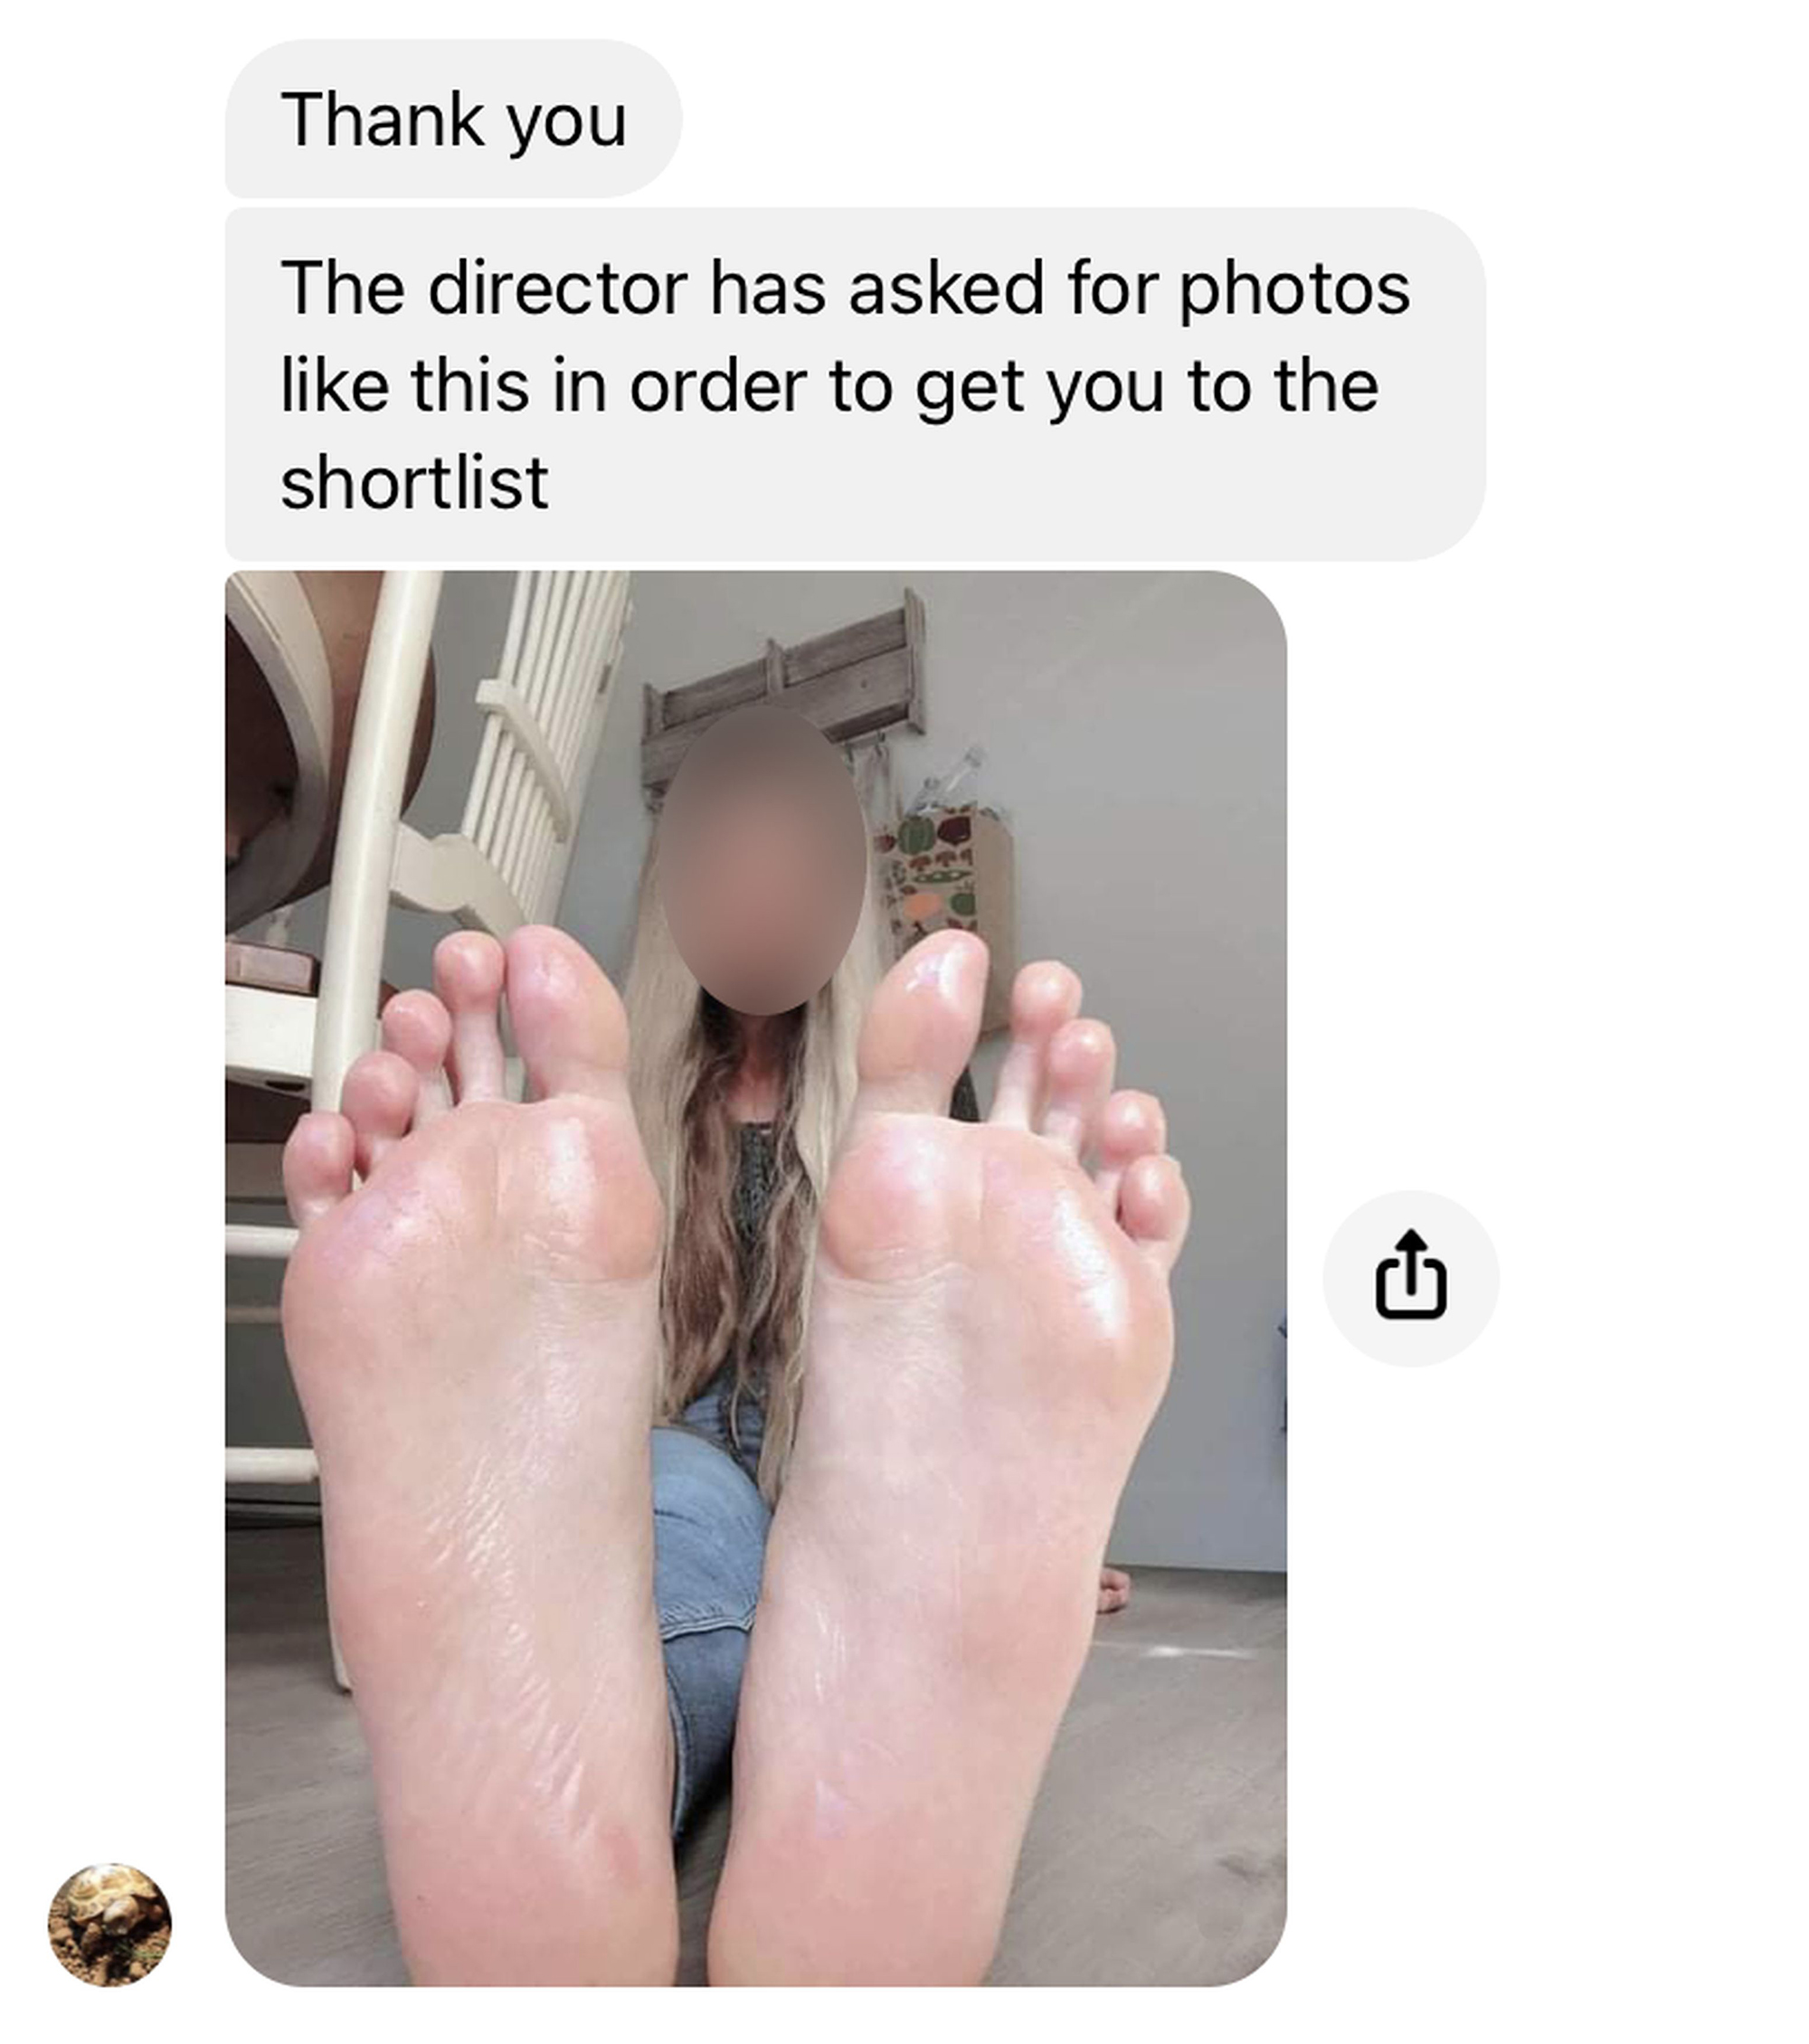 The alleged foot fetishist, named Nathan, had requested that McNair send feet pics to audition for the role.